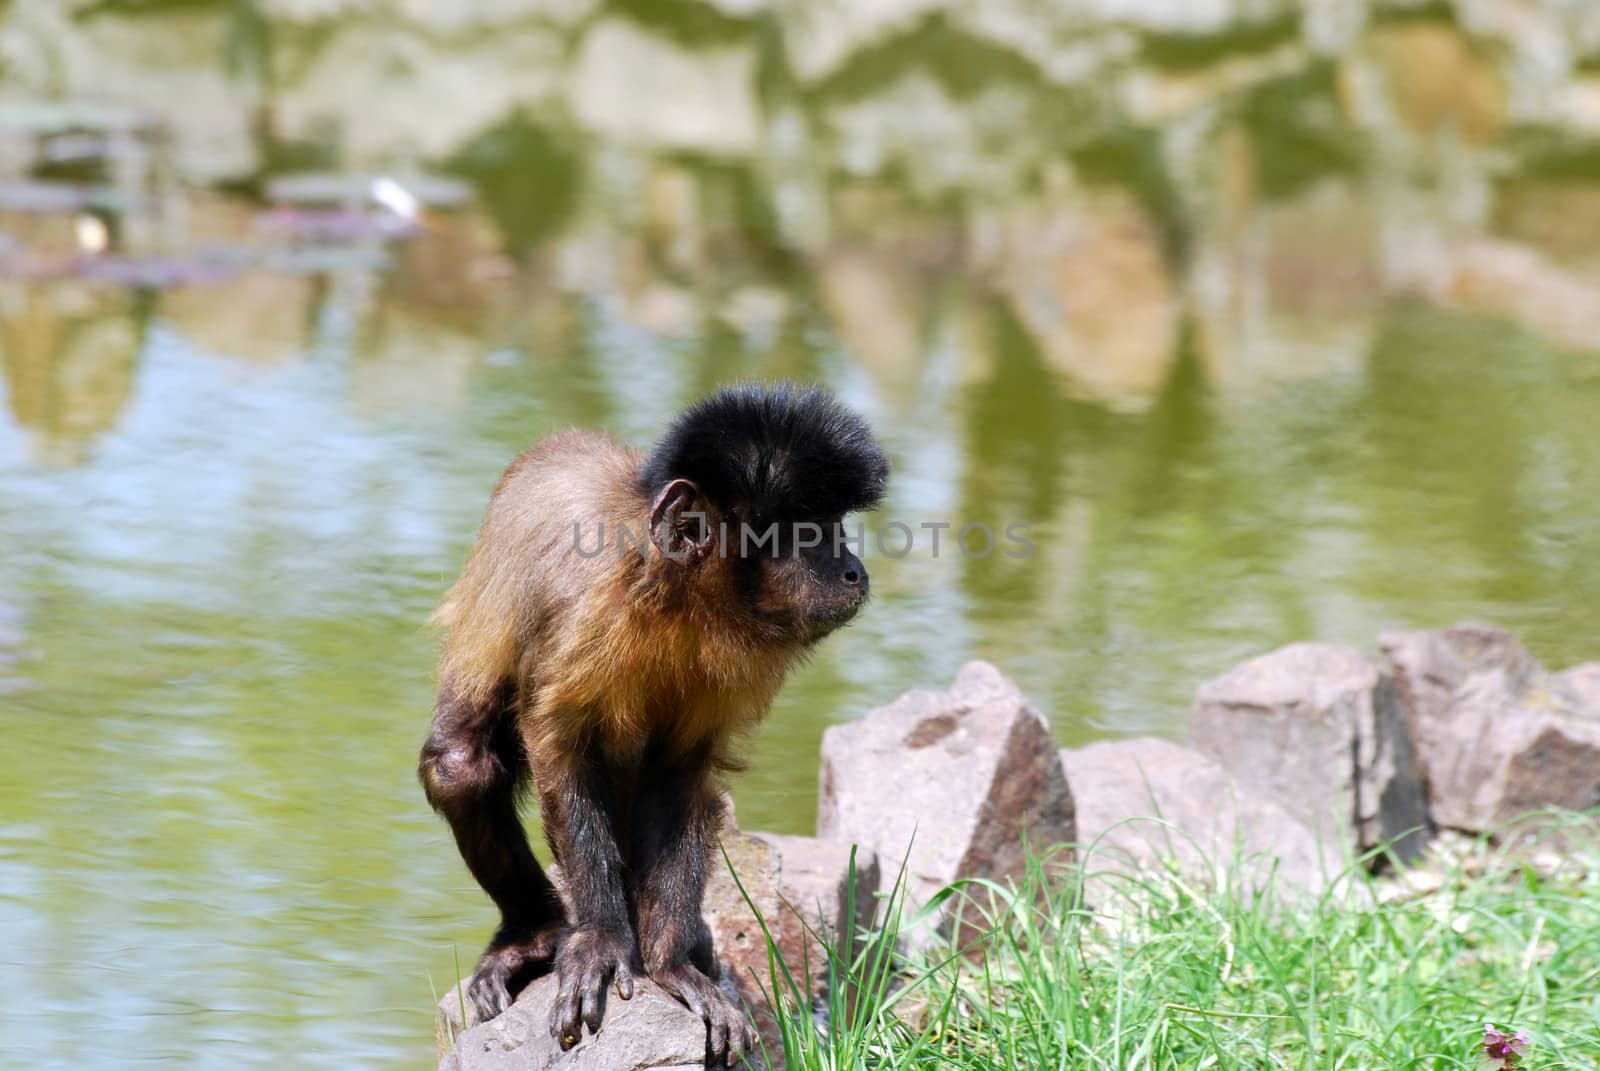 little macaque monkey standing on a rock